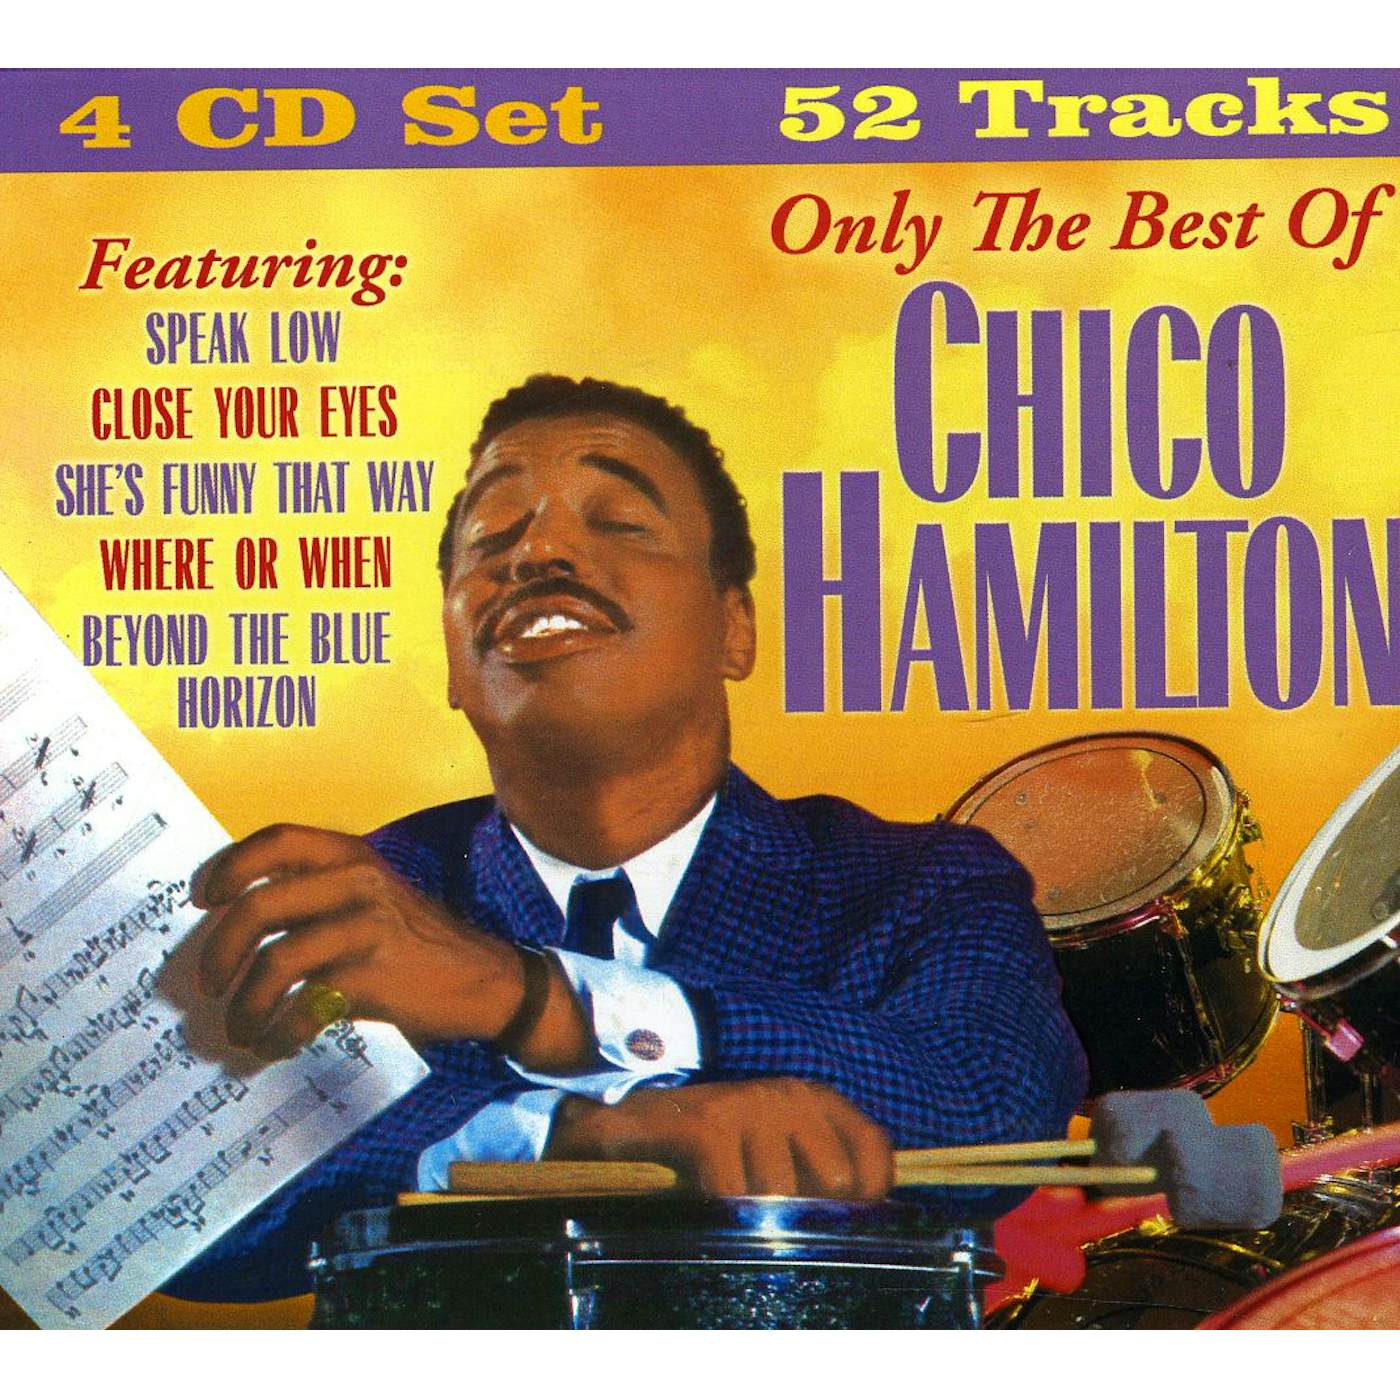 ONLY THE BEST OF CHICO HAMILTON CD